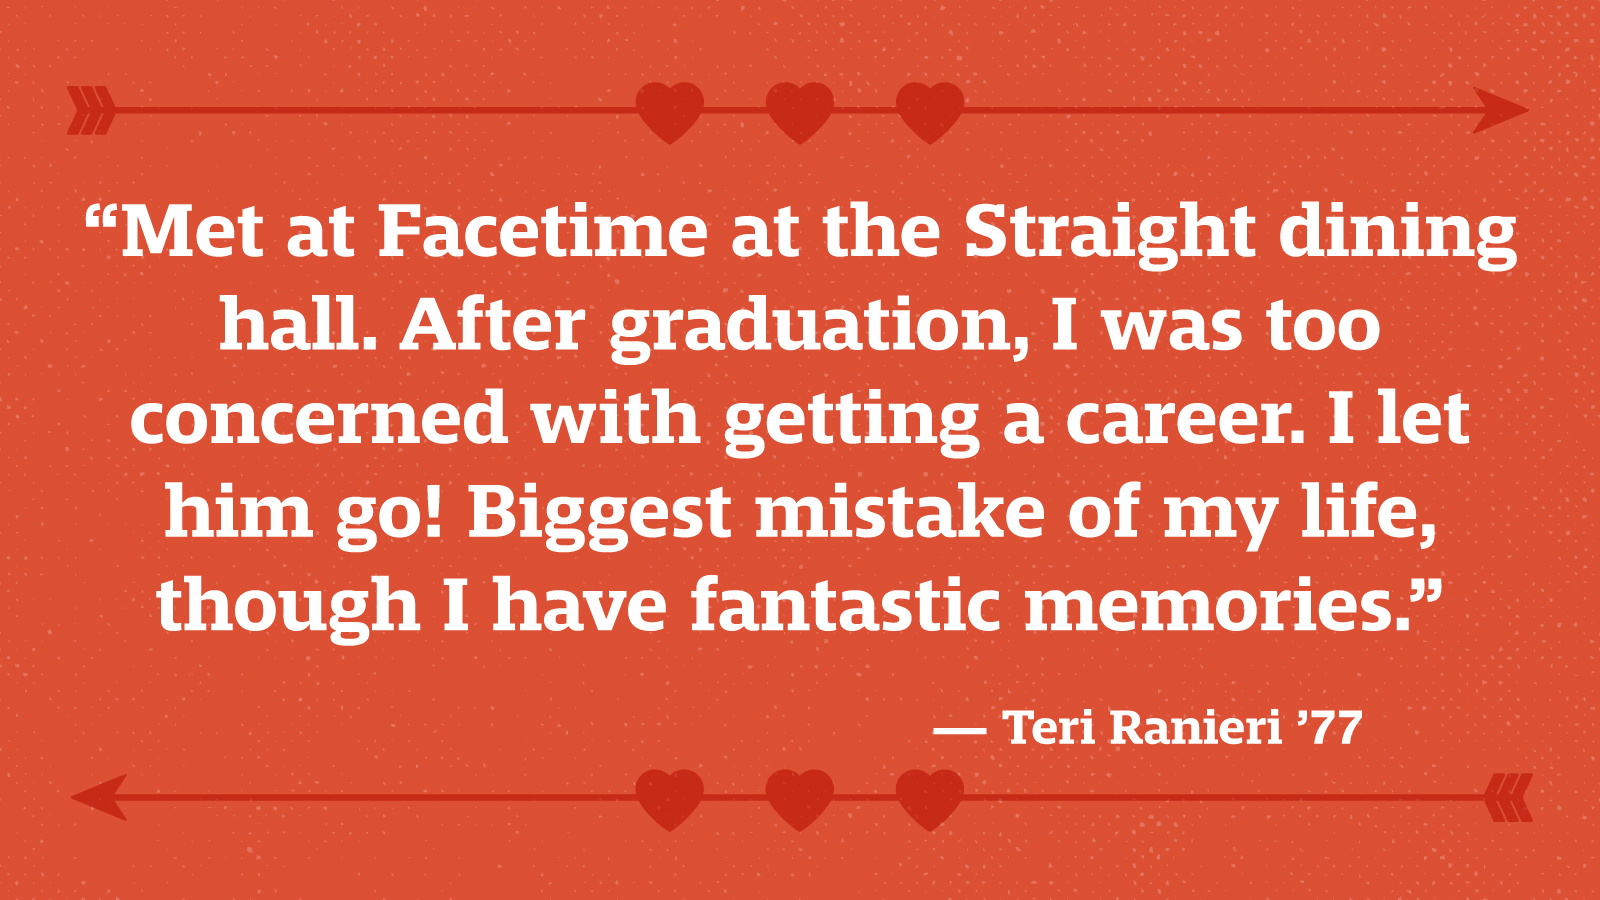 “Met at Facetime at the Straight dining hall. After graduation, I was too concerned with getting a career. I let him go! Biggest mistake of my life, though I have fantastic memories.” — Teri Ranieri ’77